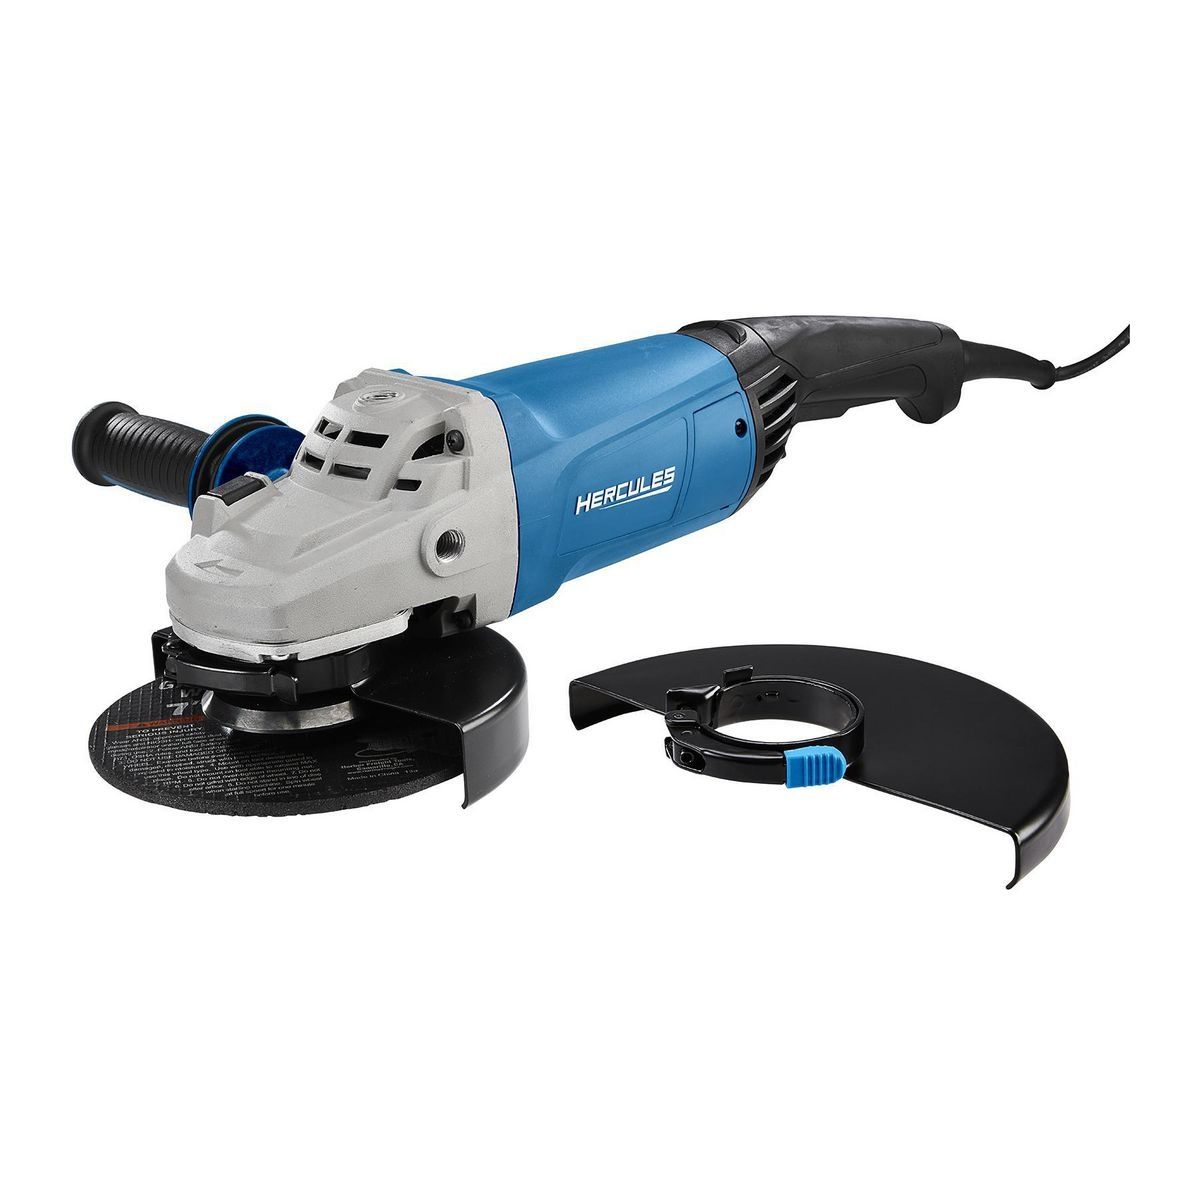 HERCULES 15 Amp 7 in./9 in.  Trigger Grip Angle Grinder